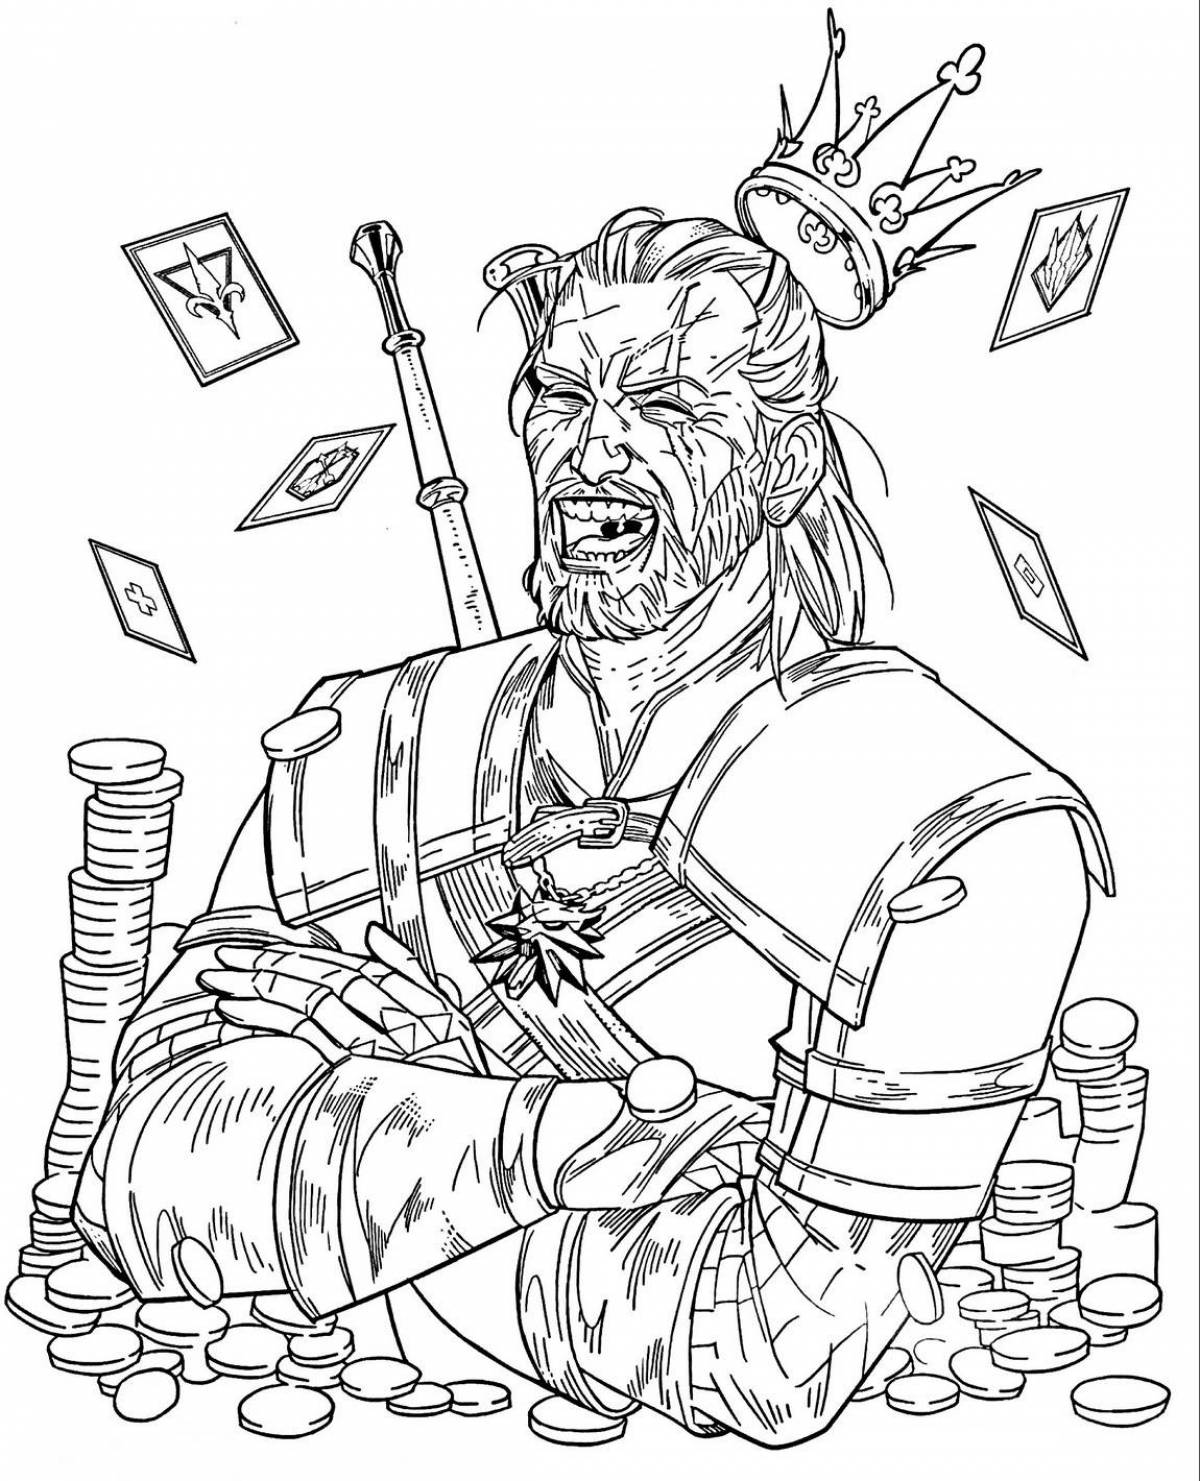 Enchant the witcher coloring book